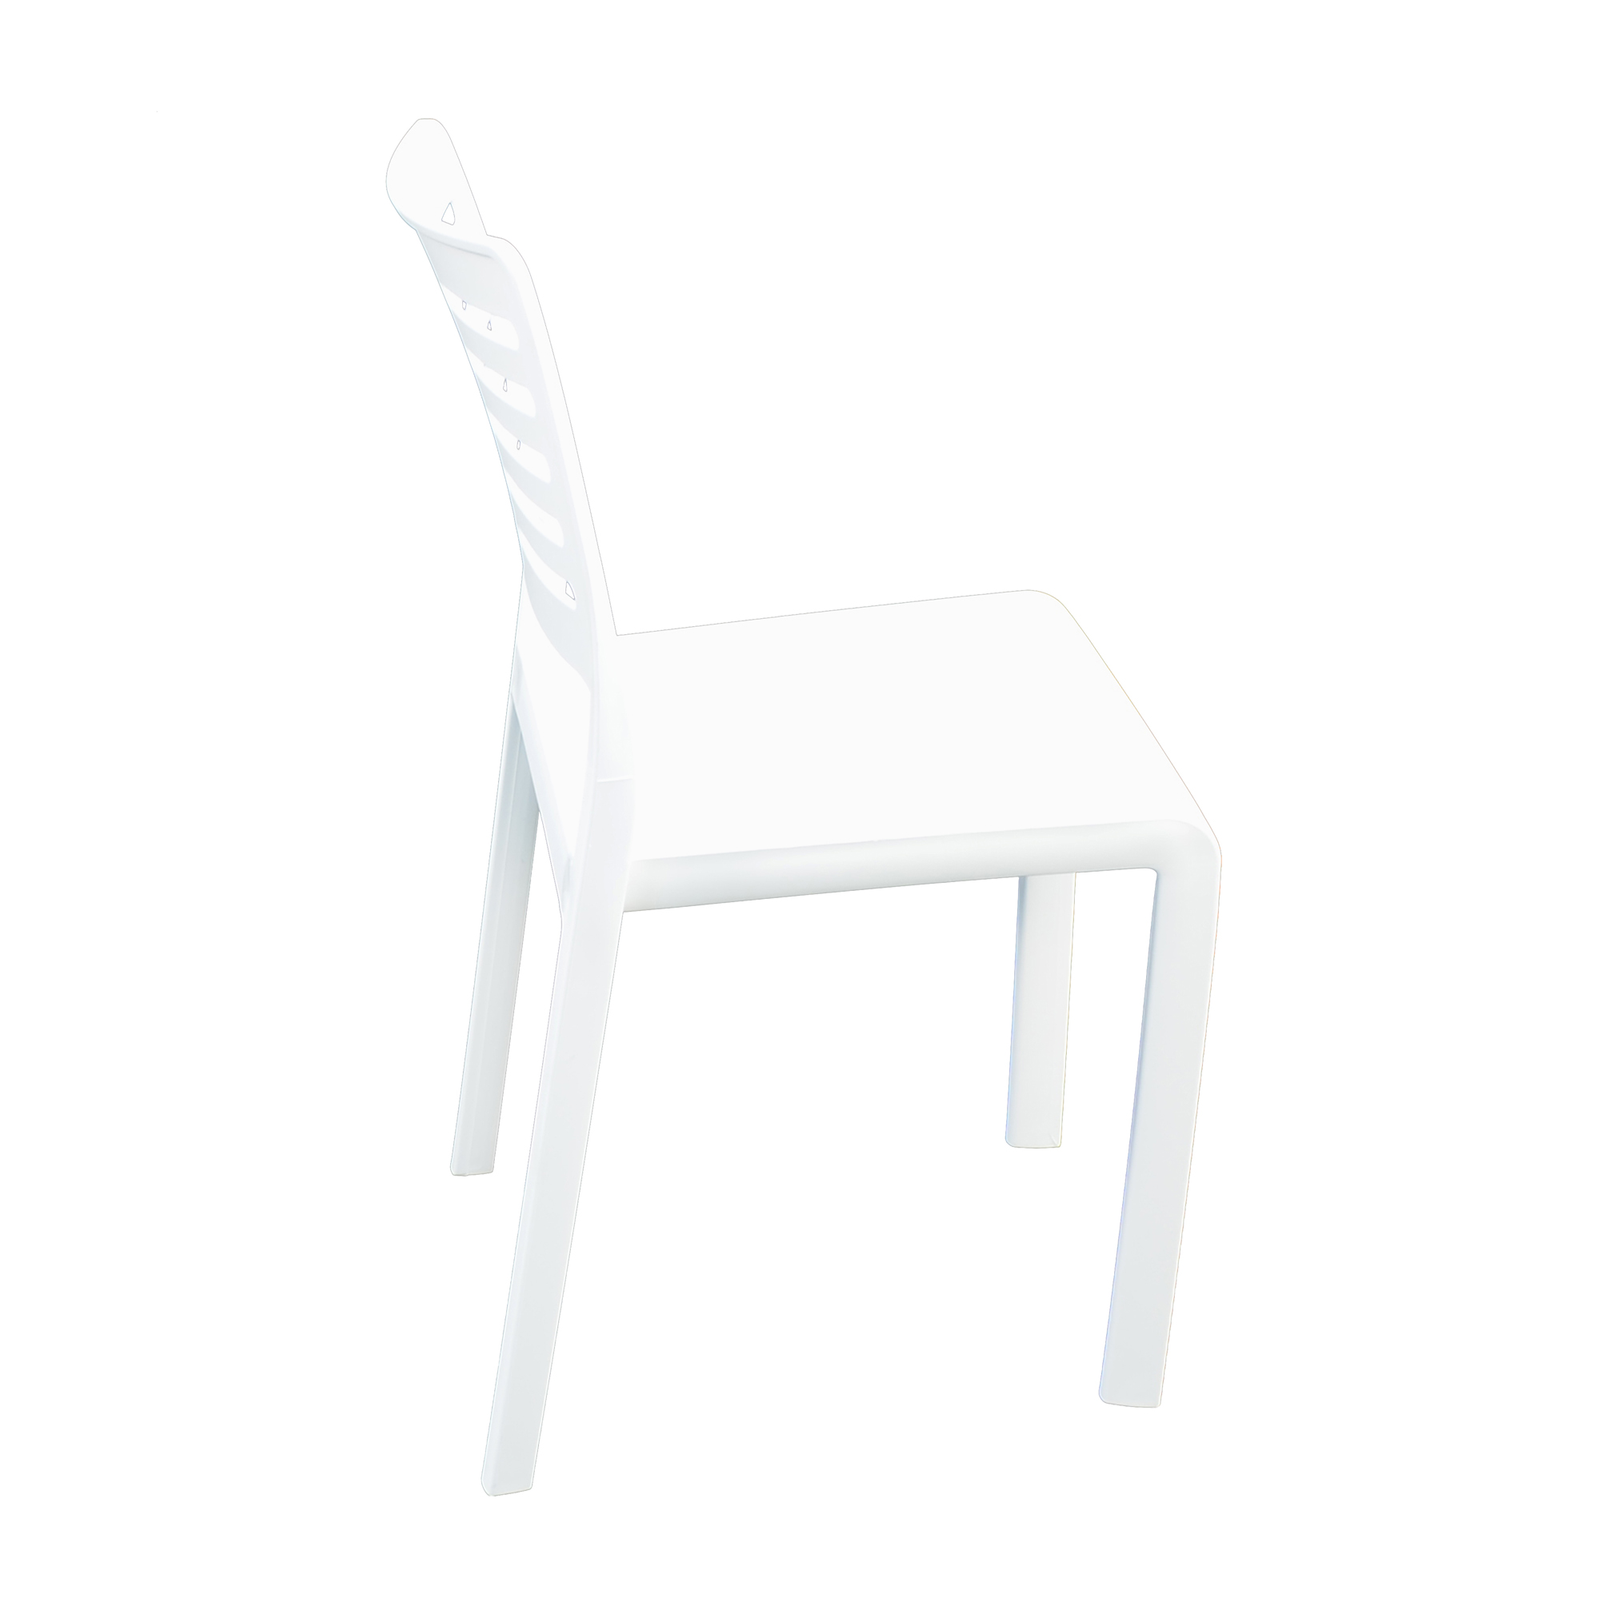 Trabella Mistral Chair in White (Pack of 2) Chairs Trabella   